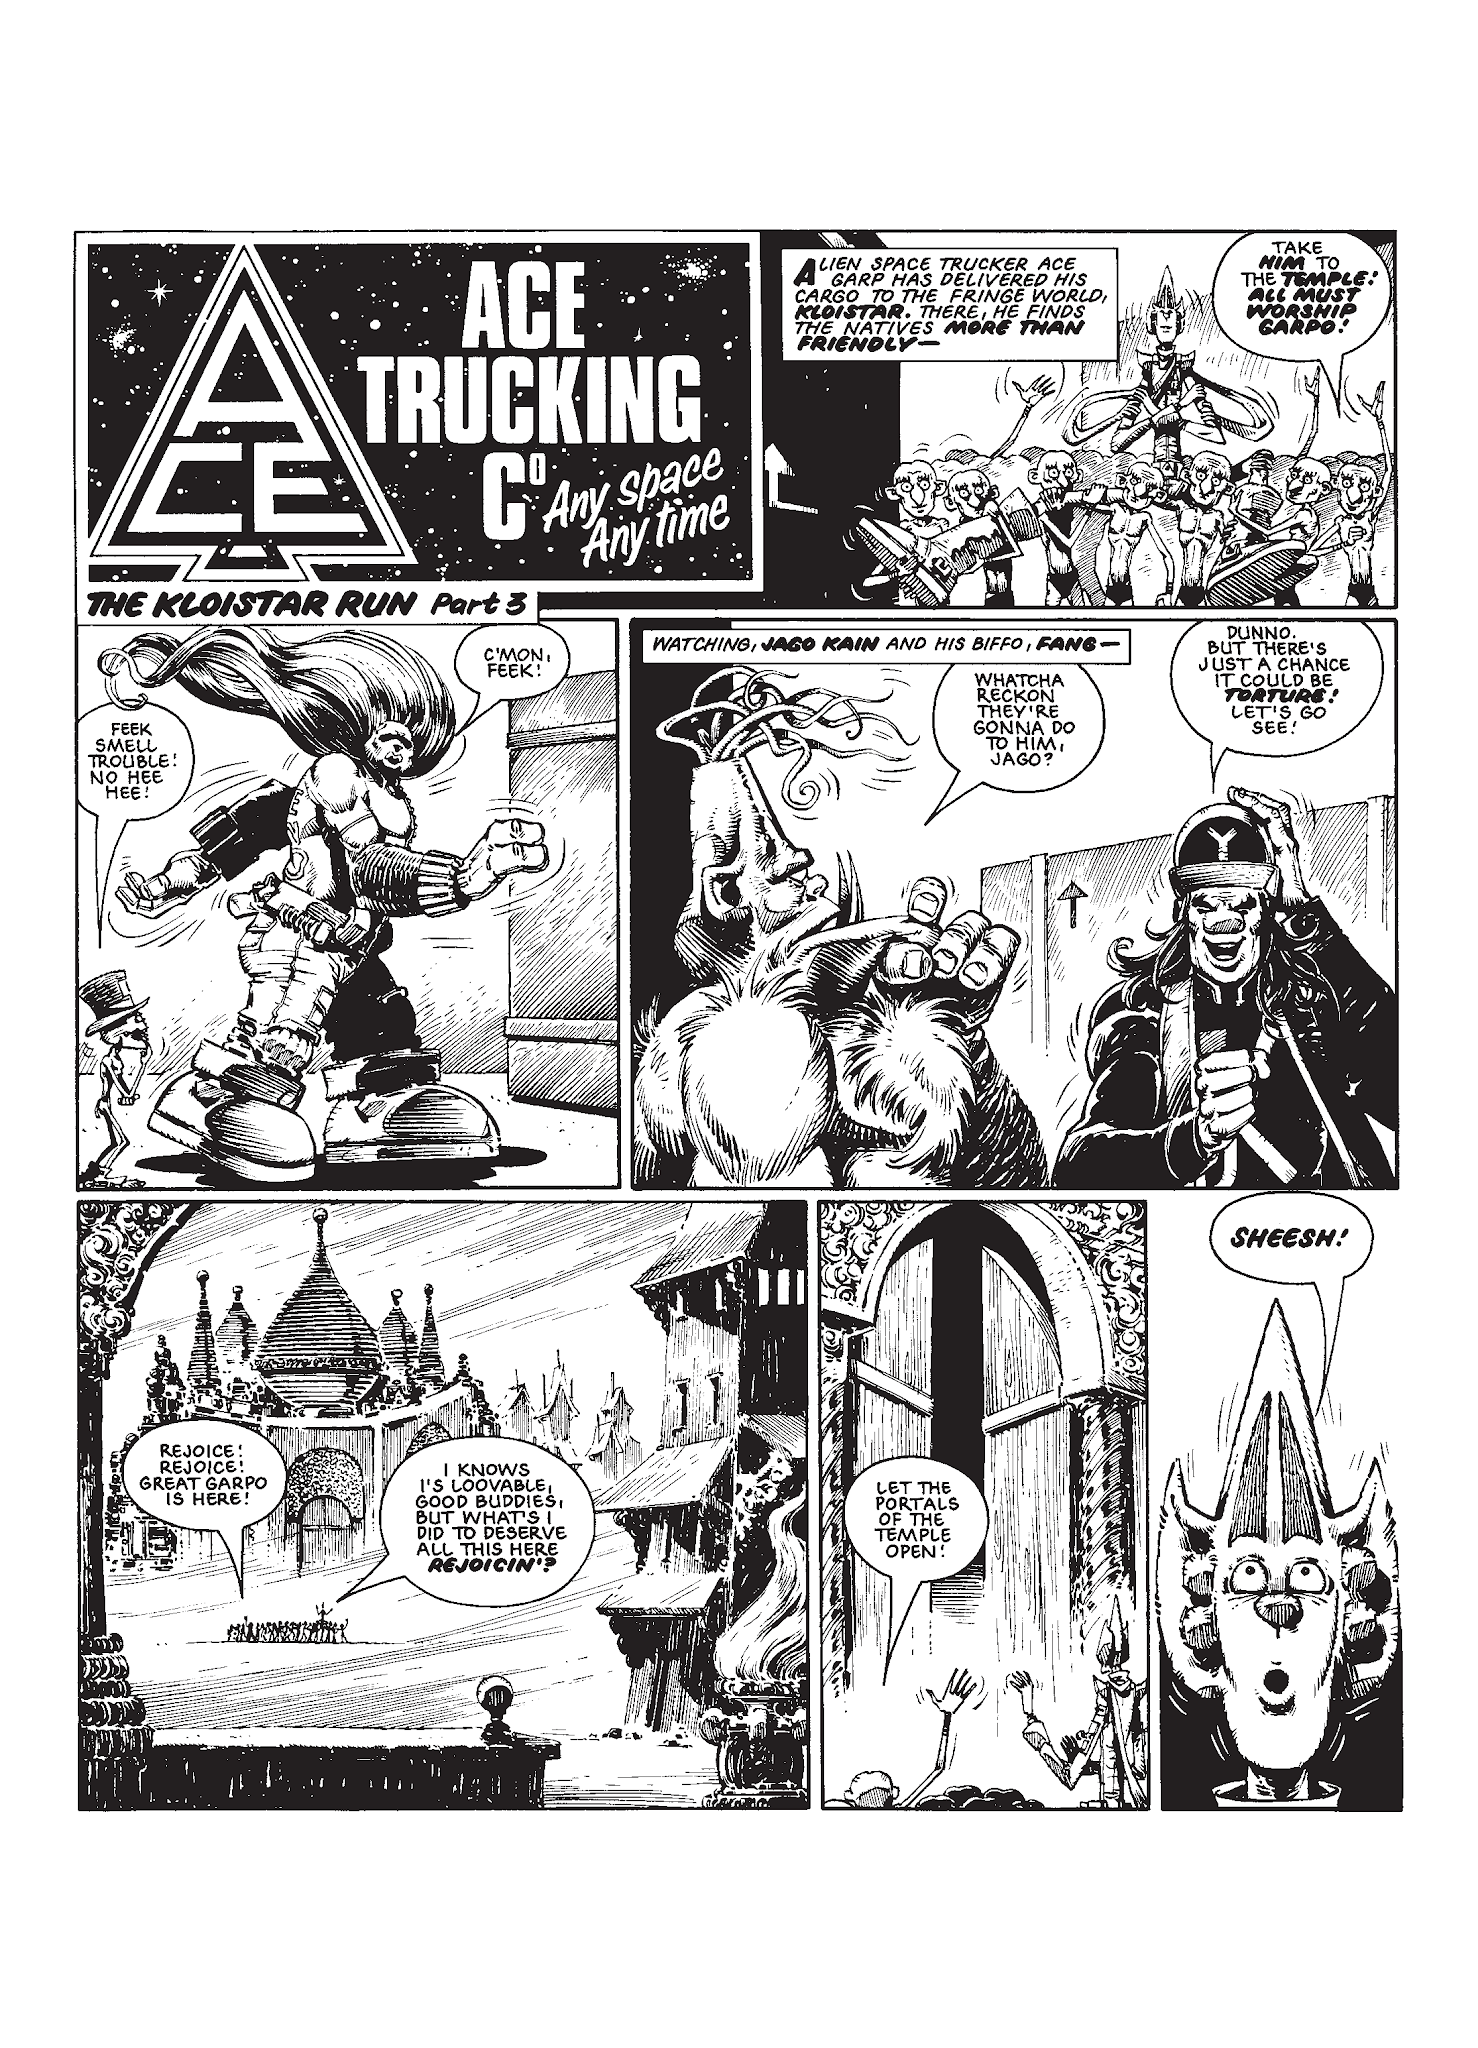 Read online The Complete Ace Trucking Co. comic -  Issue # TPB 1 - 240